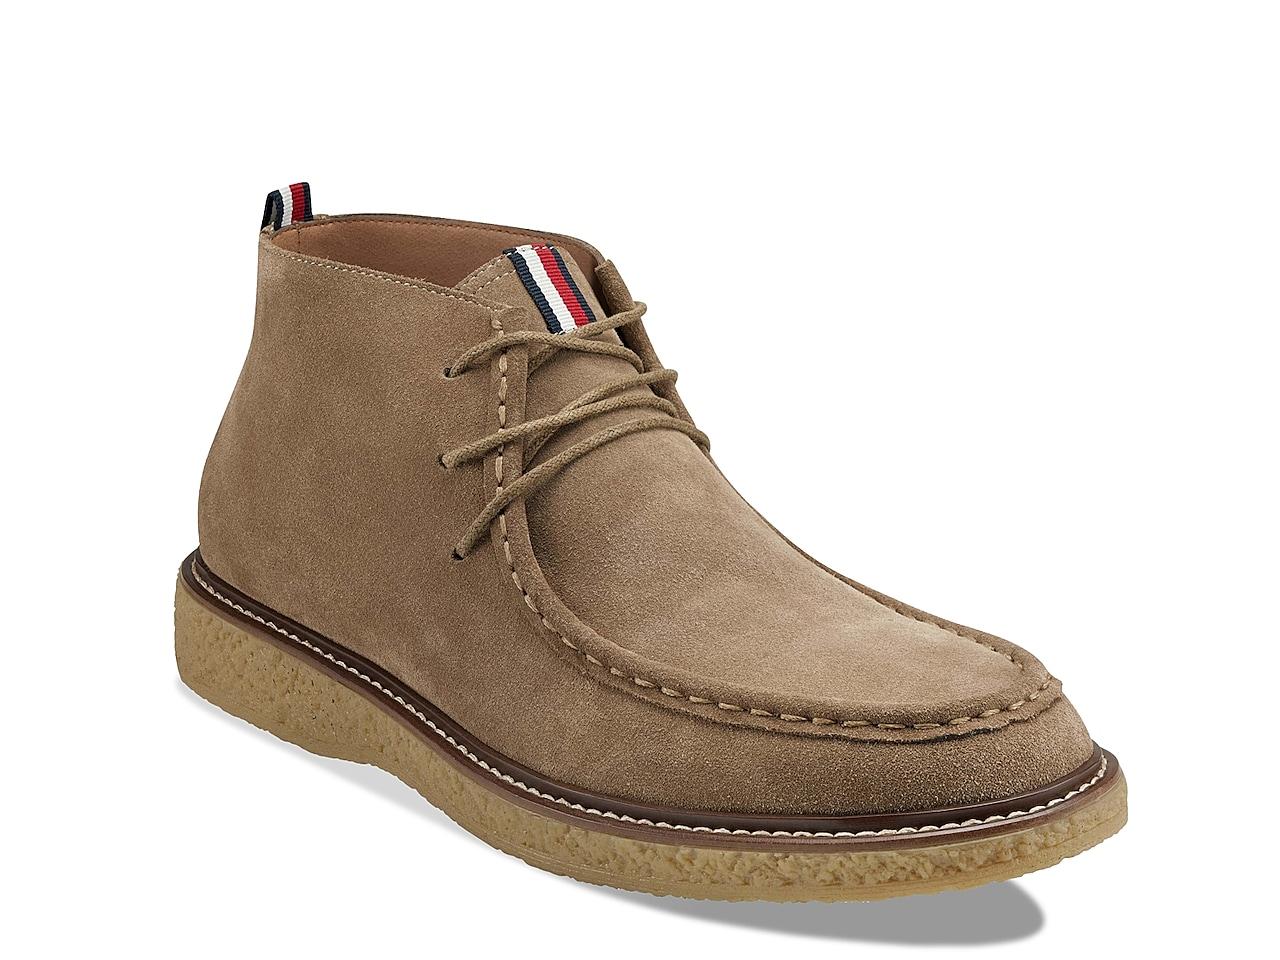 Tommy Hilfiger Suede Tomtry Chukka Boot in Taupe (Brown) for Men - Lyst